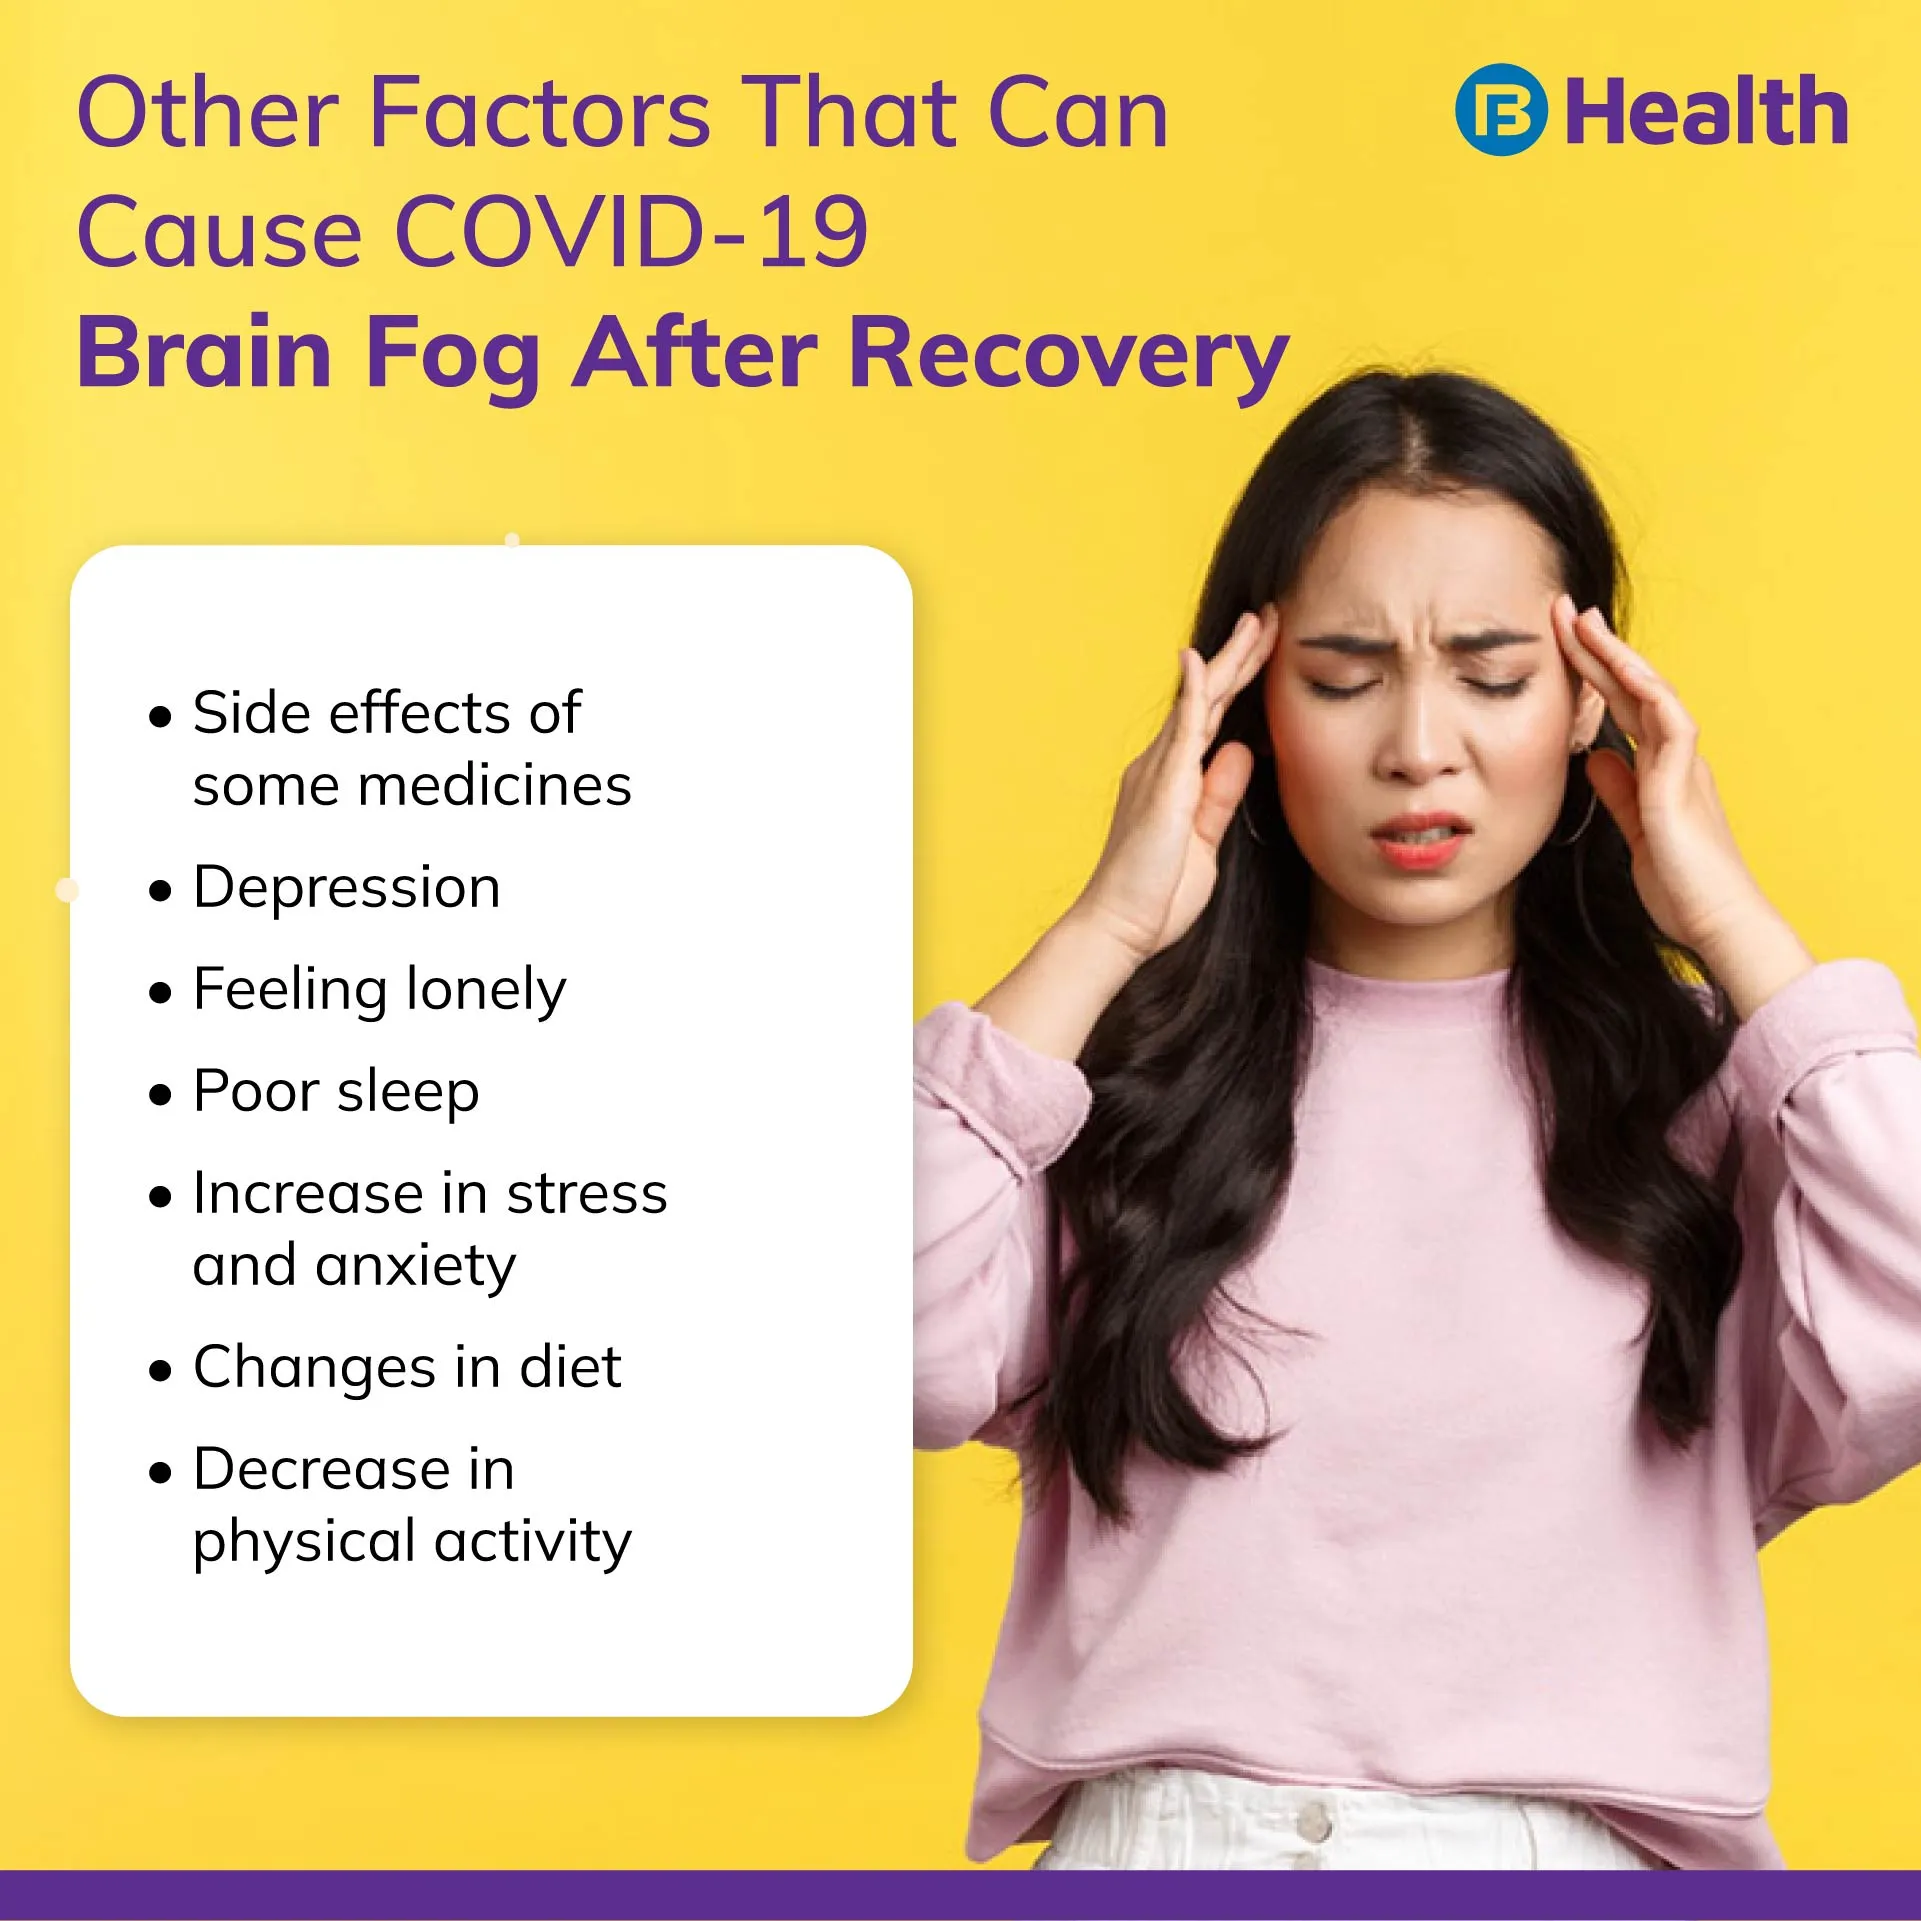 causes of COVID - 19 Brain Fog after recovery